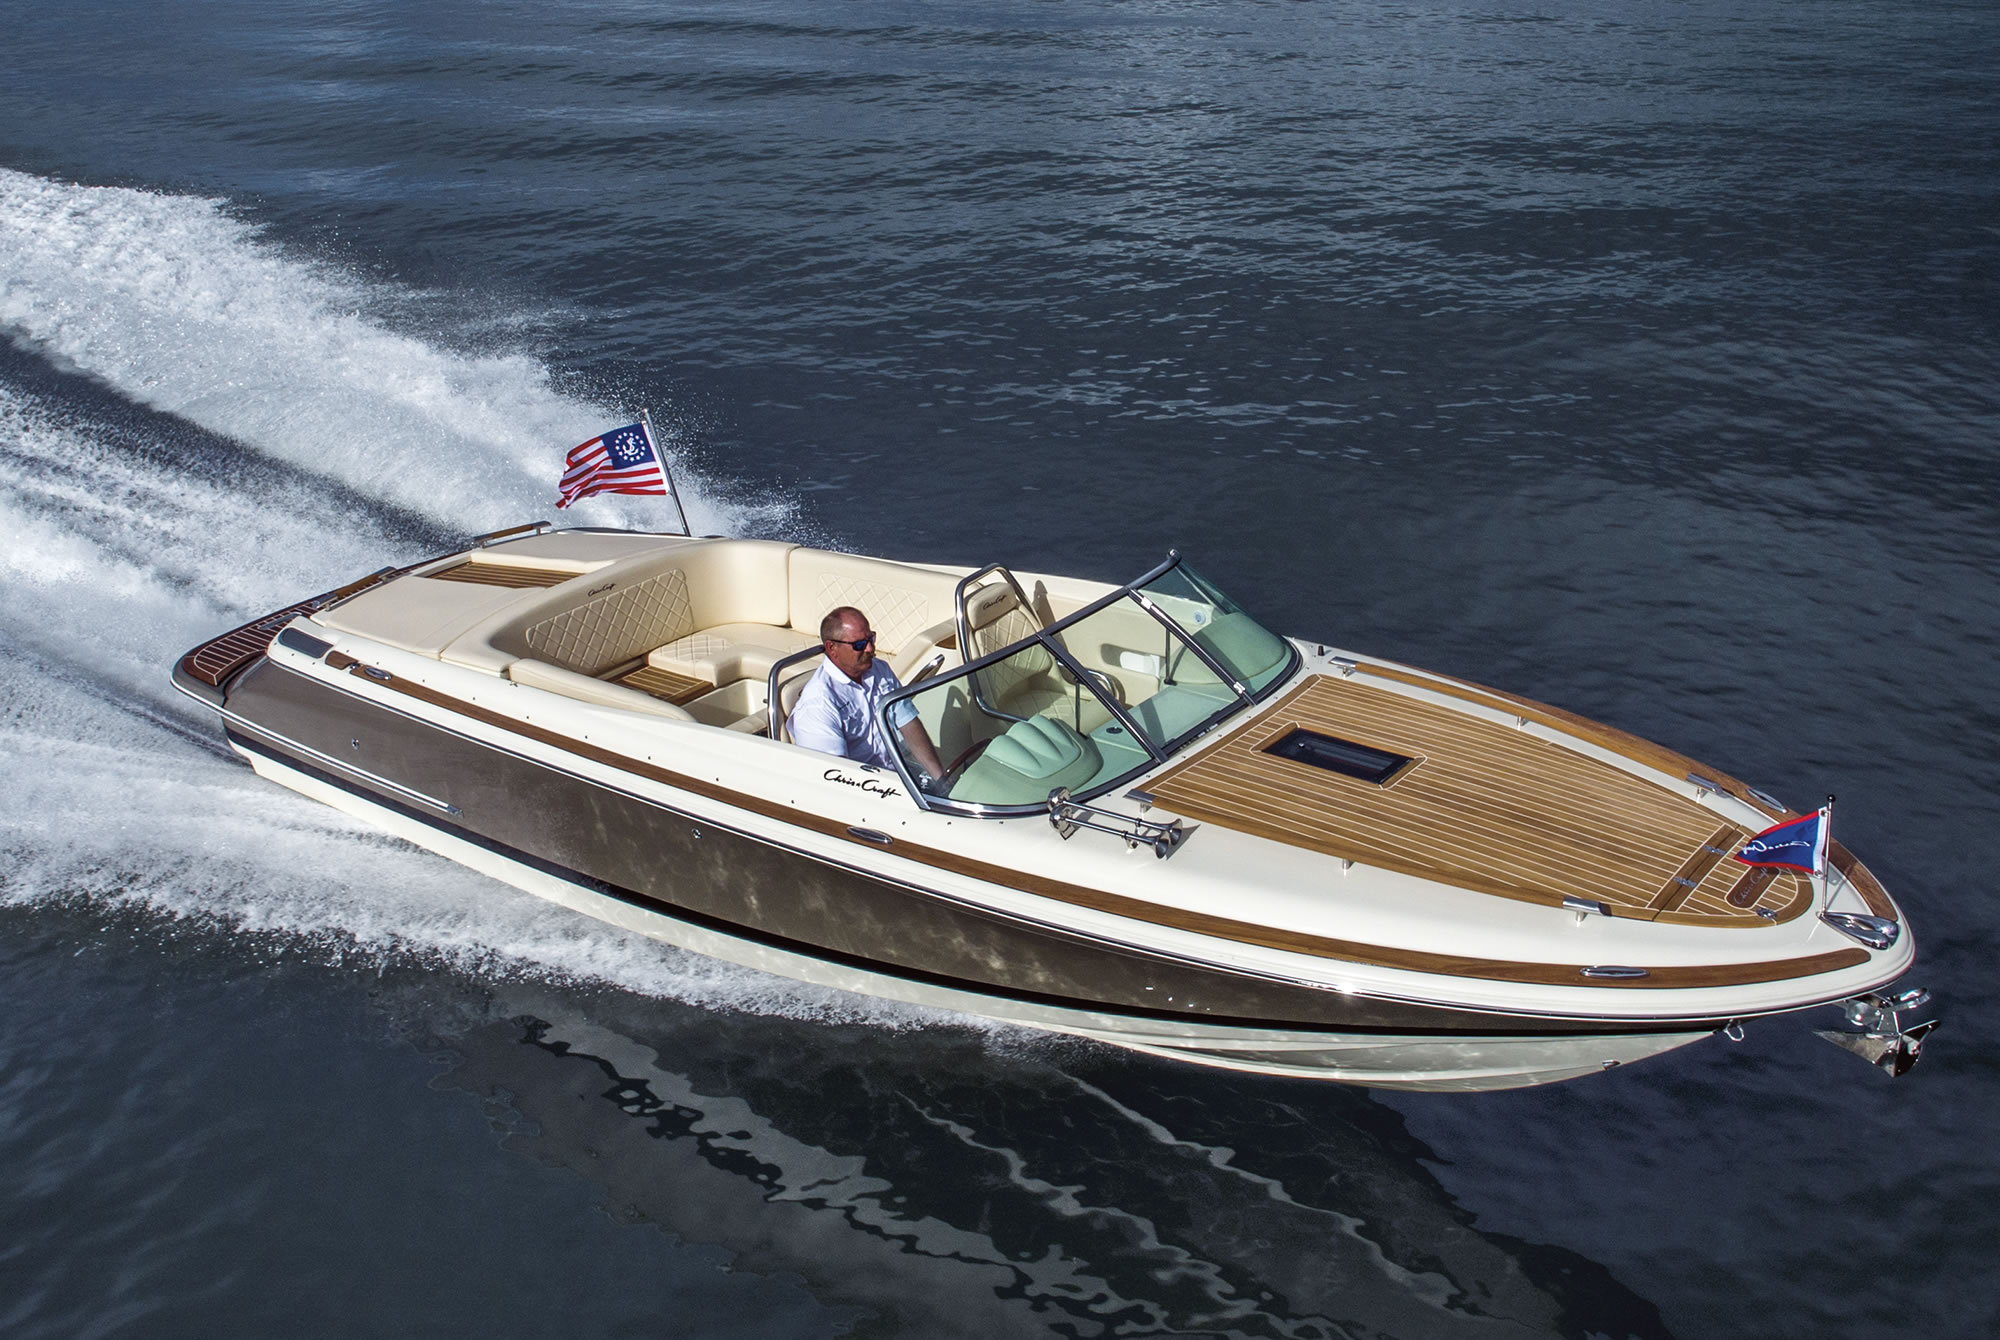 Where can you find plans and specifications for Chris-Craft boats?